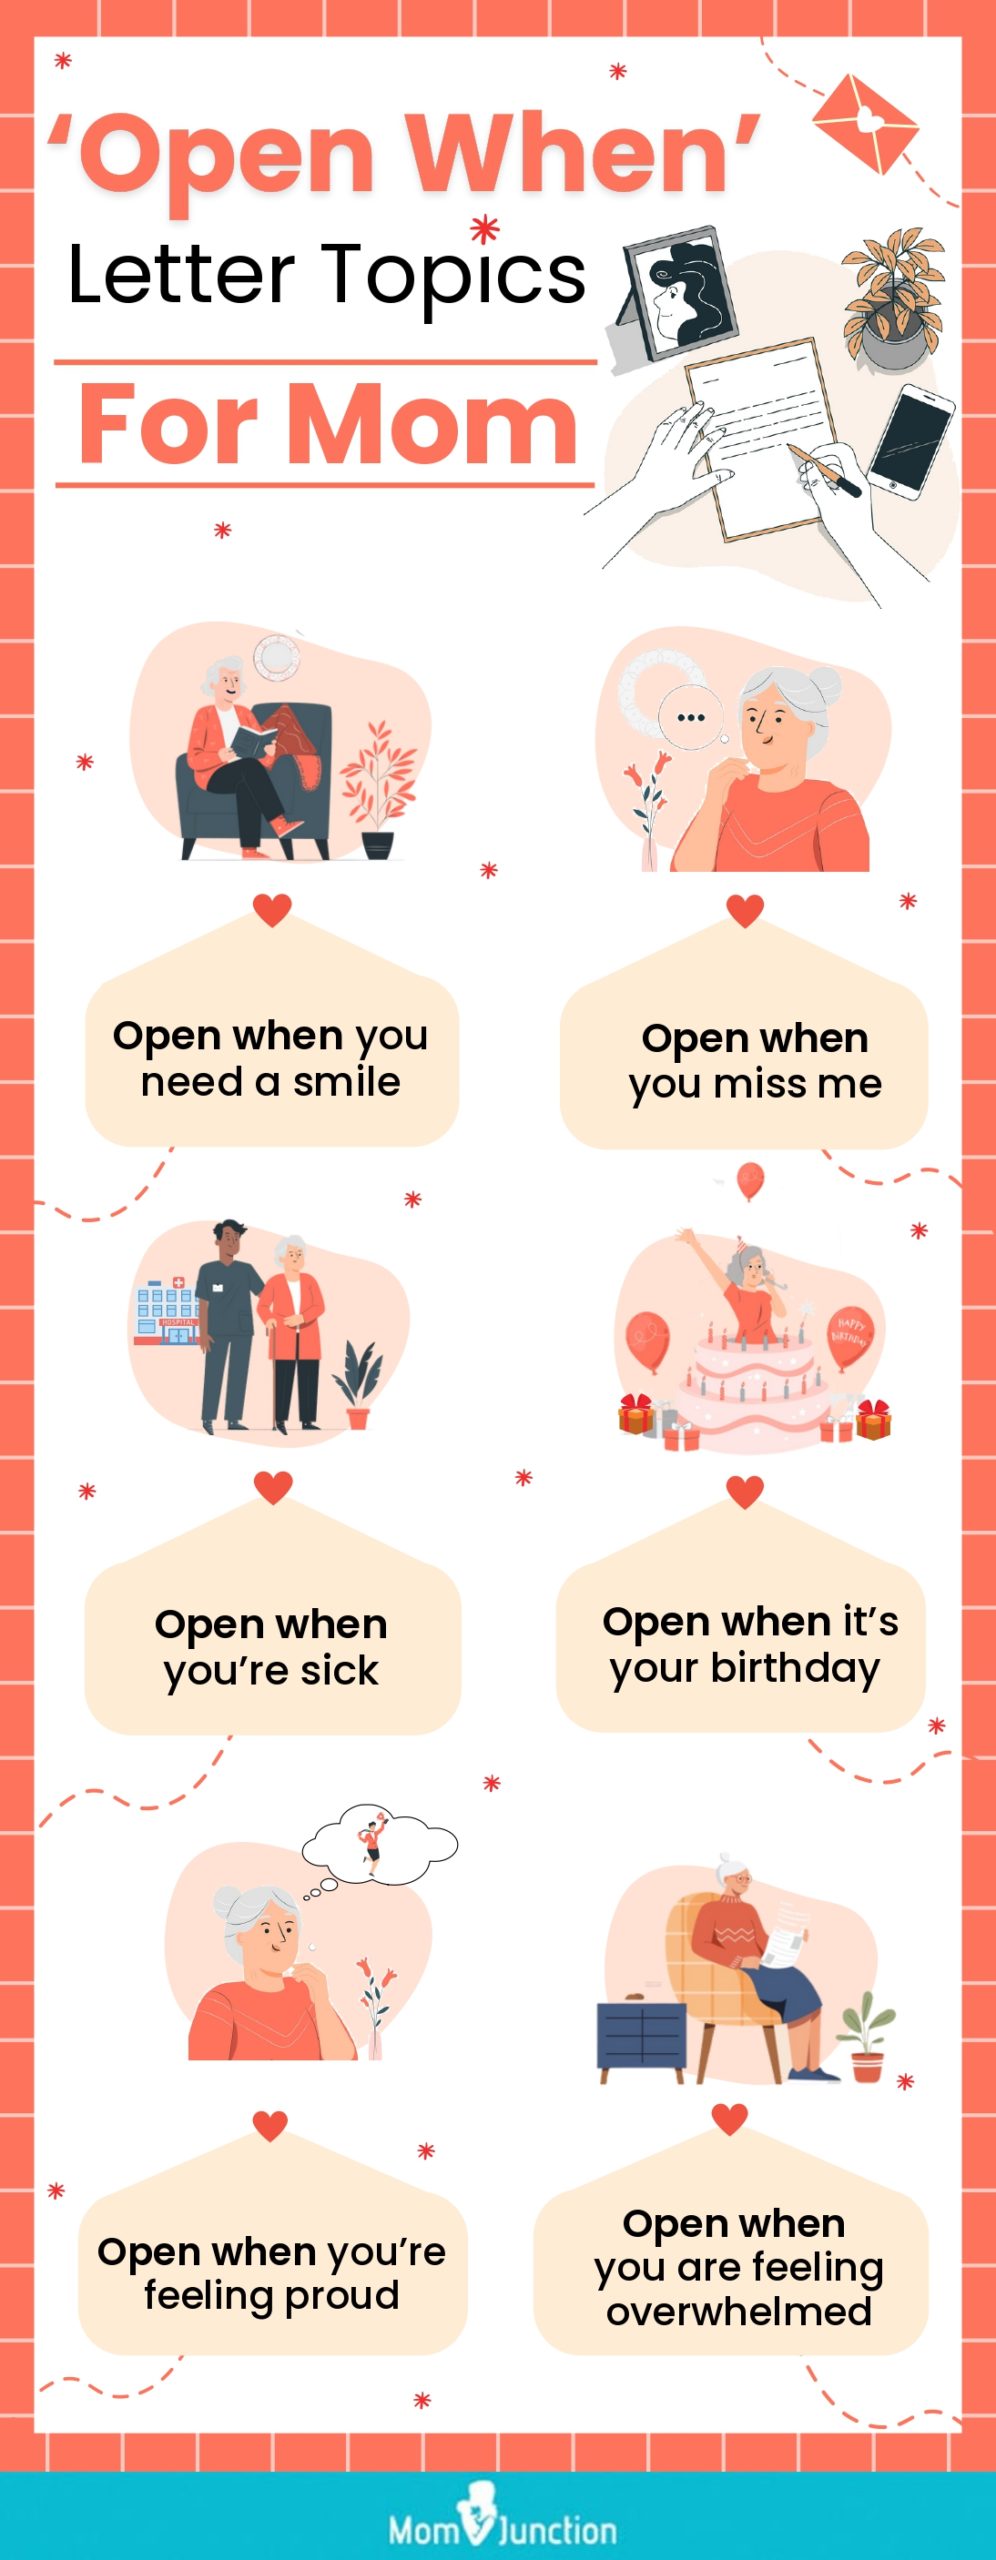 open when letters to mom (infographic)